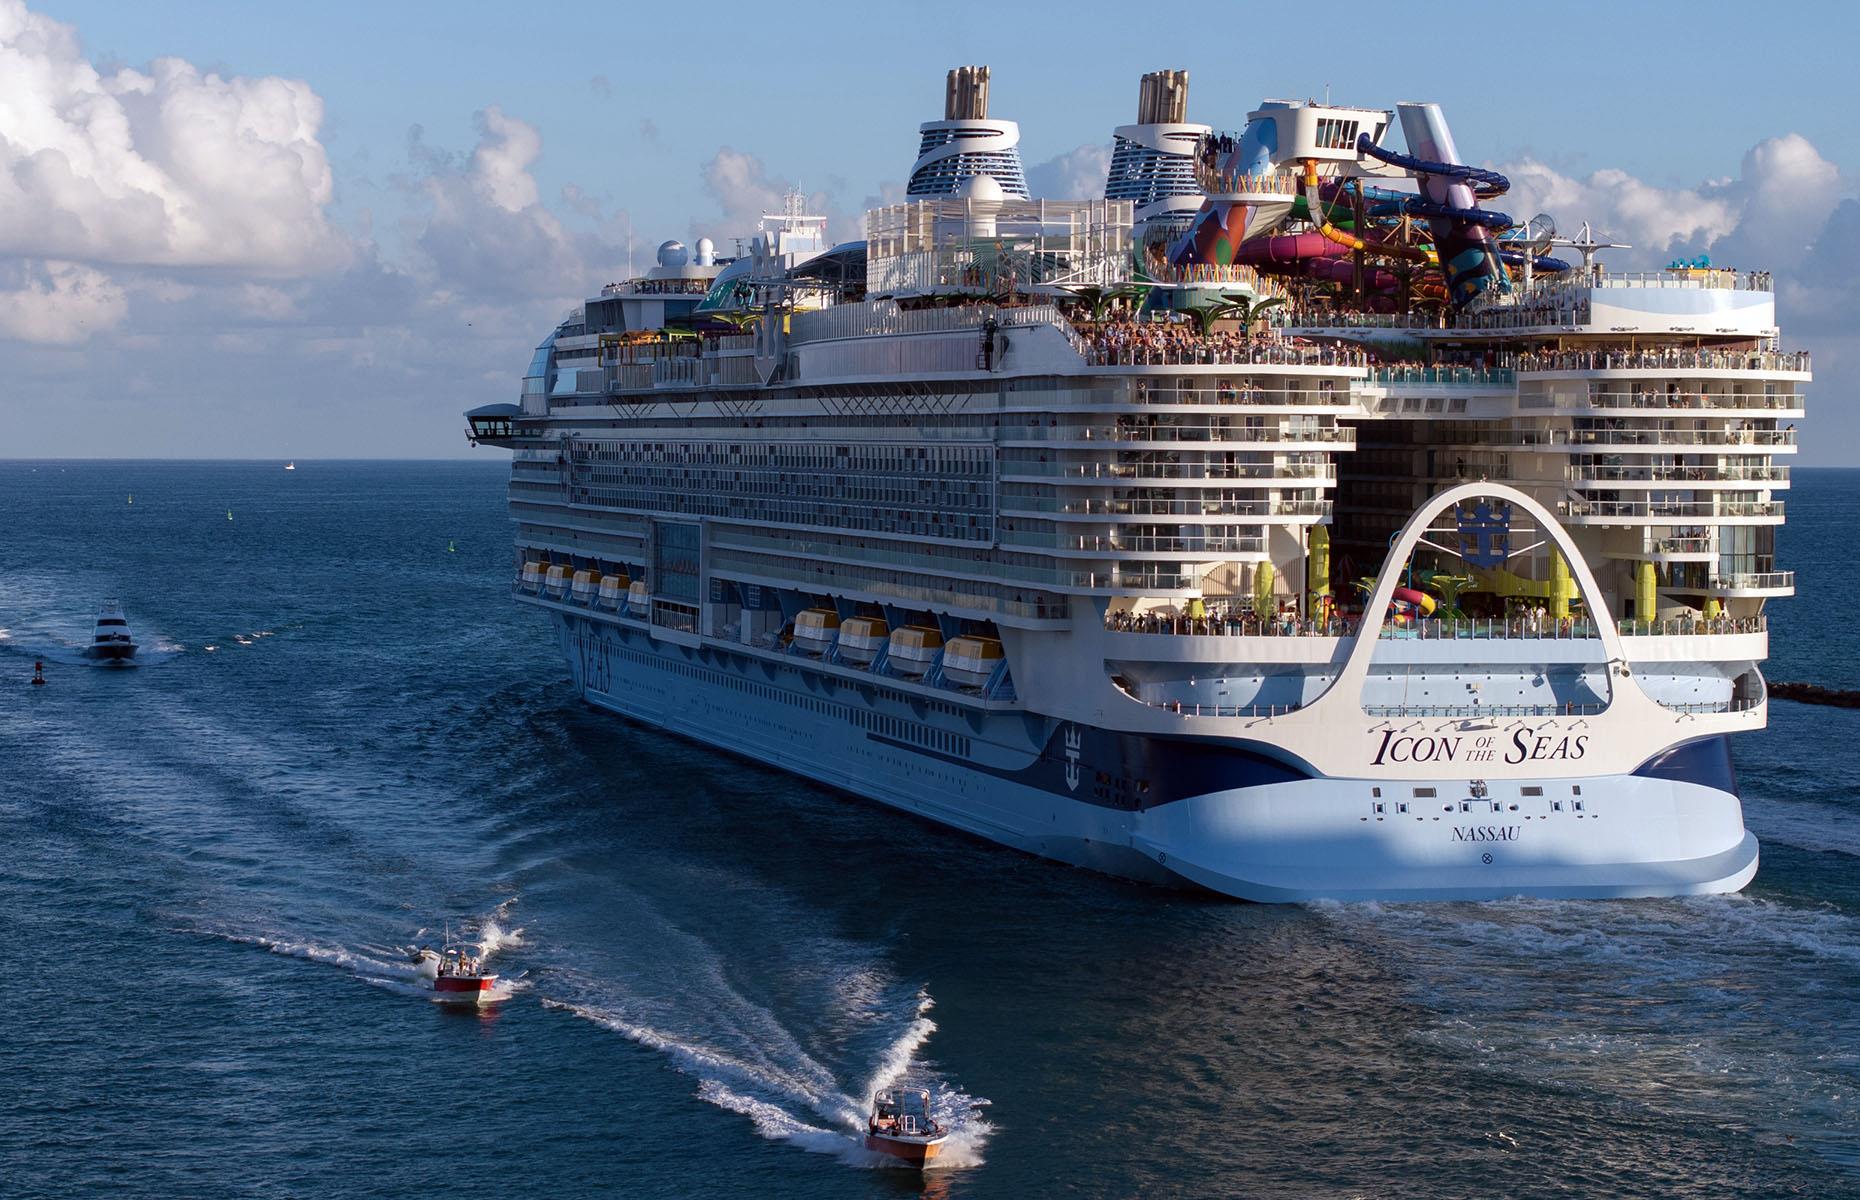 <p>Royal Caribbean's latest marvel, <em>Icon of the Seas</em>, set sail on its maiden voyage in January. The mammoth vessel currently holds the record as the world's largest cruise ship and has captured the imagination due not only to its sheer size but also its outrageous opulence.</p>  <p><strong>Read on to explore the staggering numbers behind the super-sized ship and discover the fantastic facilities passengers enjoy. </strong></p>  <p>All dollar amounts in US dollars. </p>